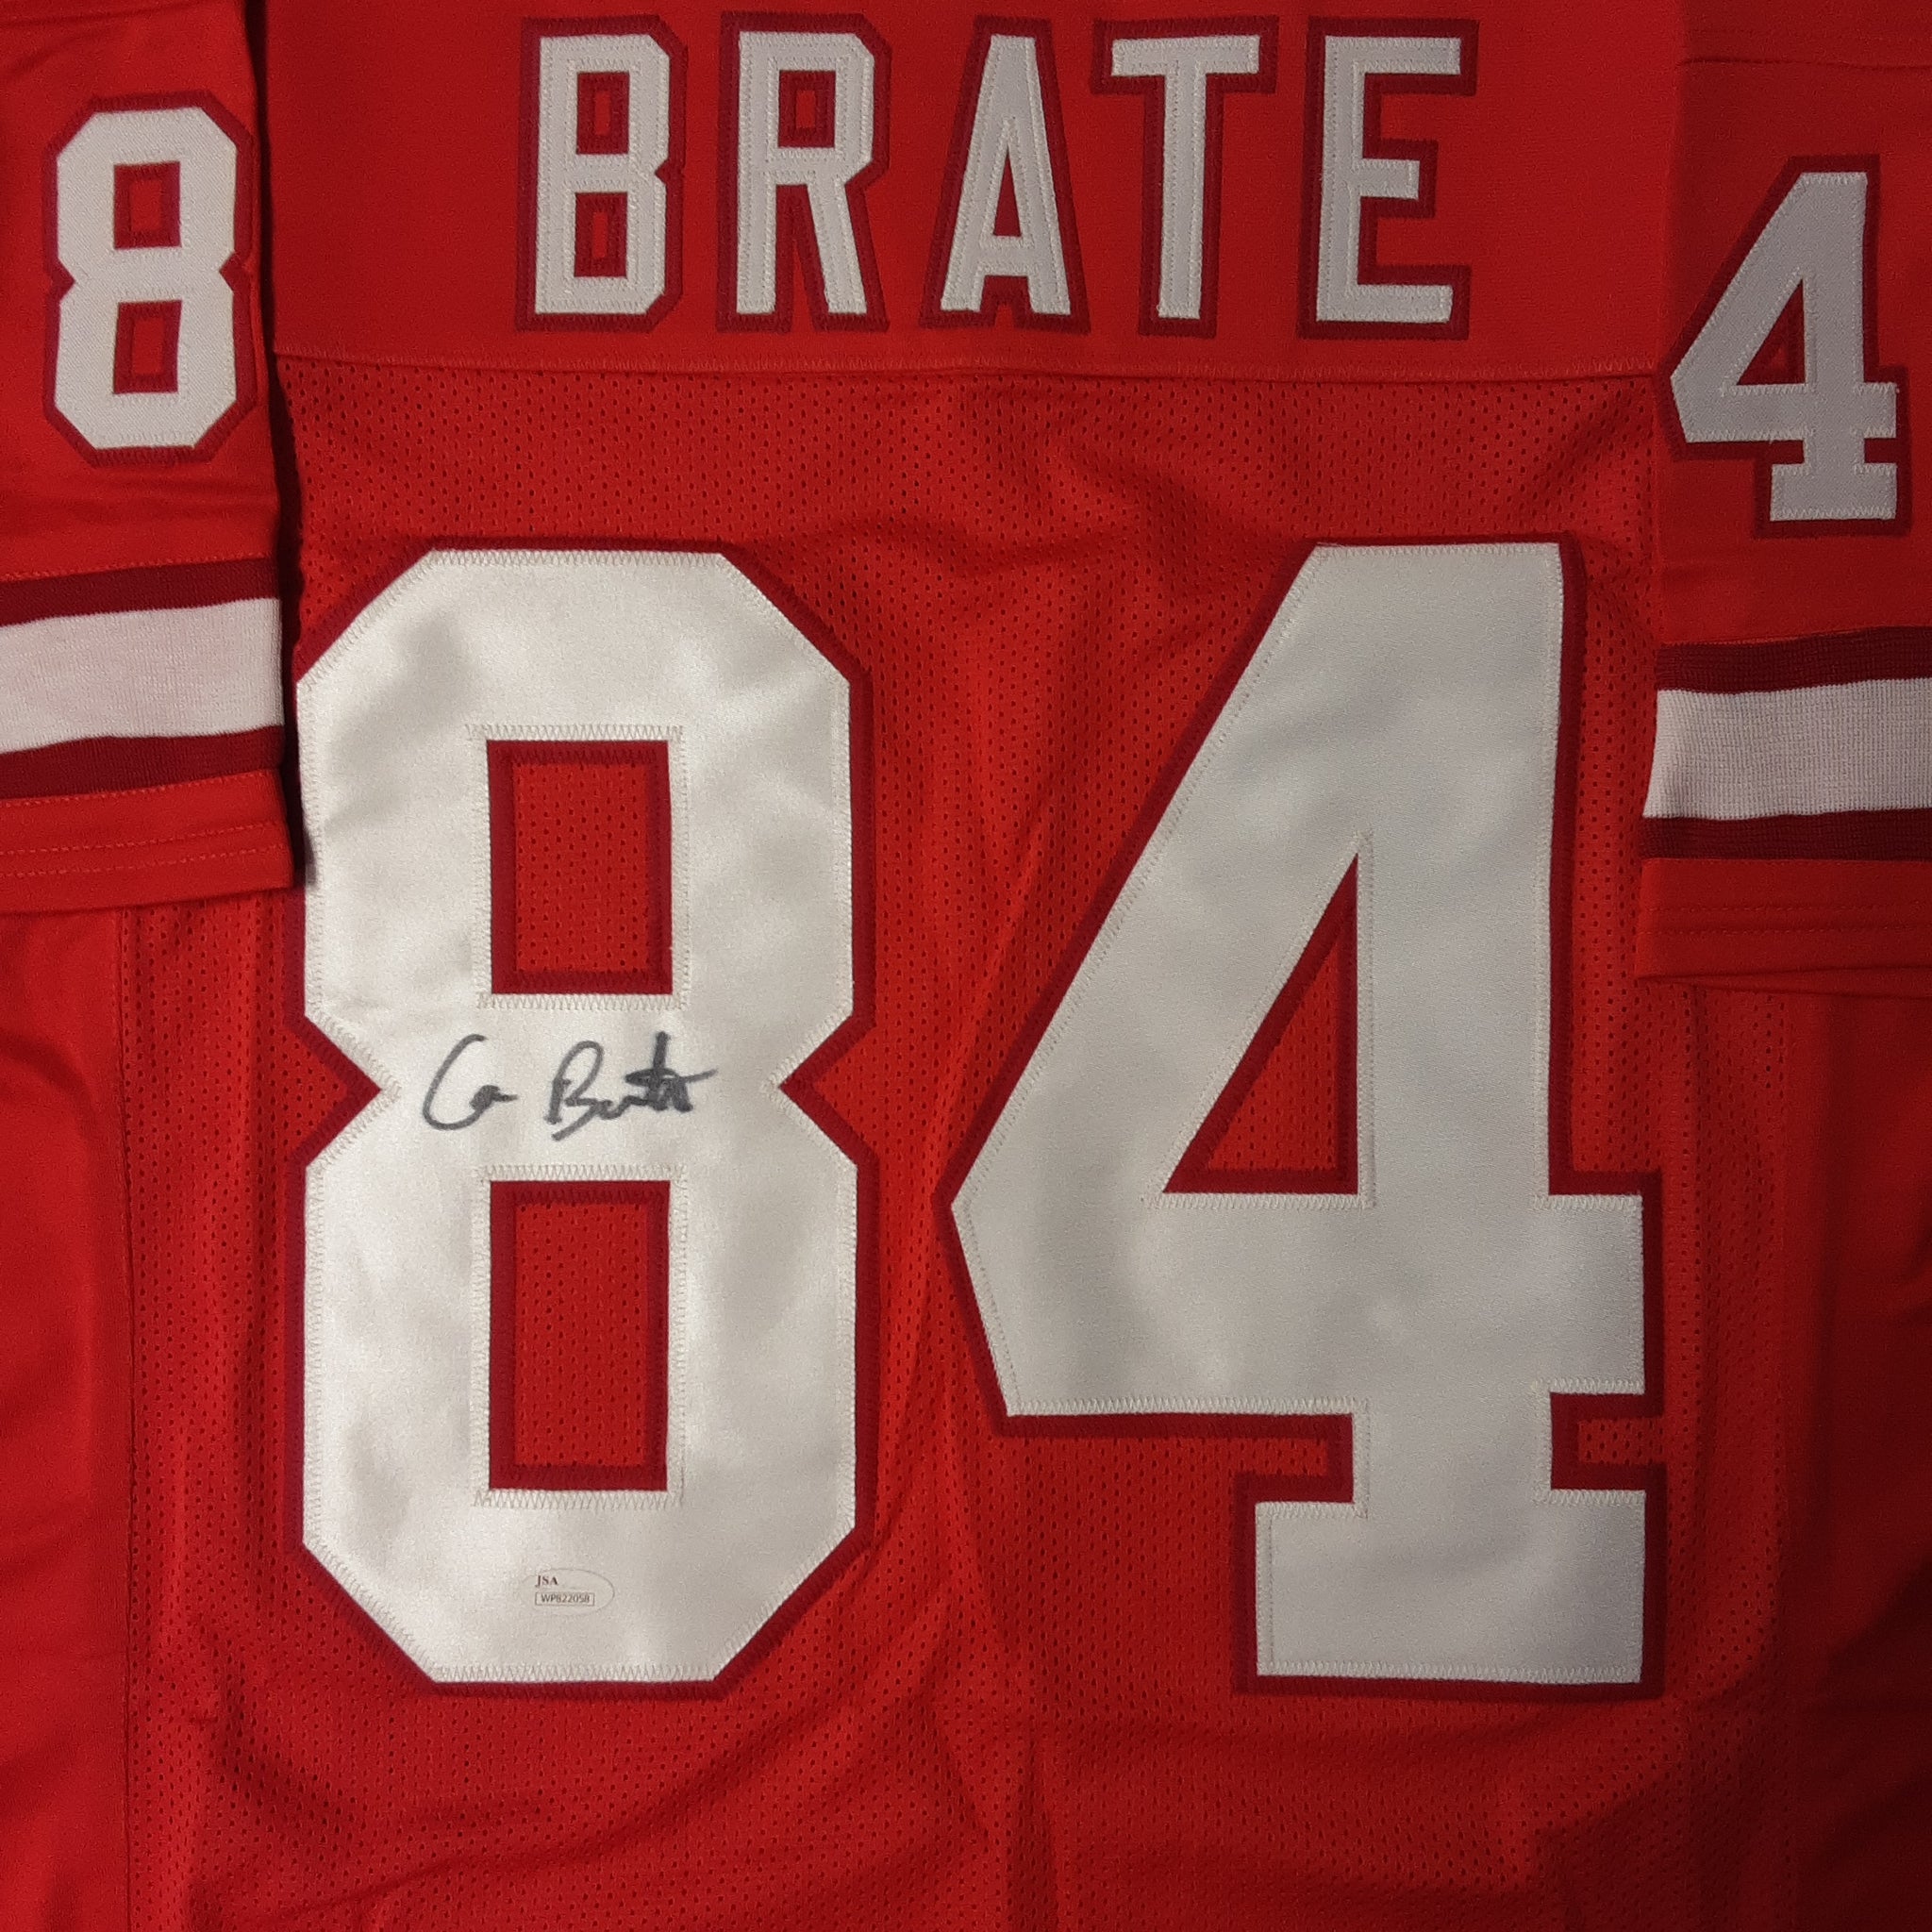 Cameron Brate Authentic Signed Pro Style Jersey Autographed JSA